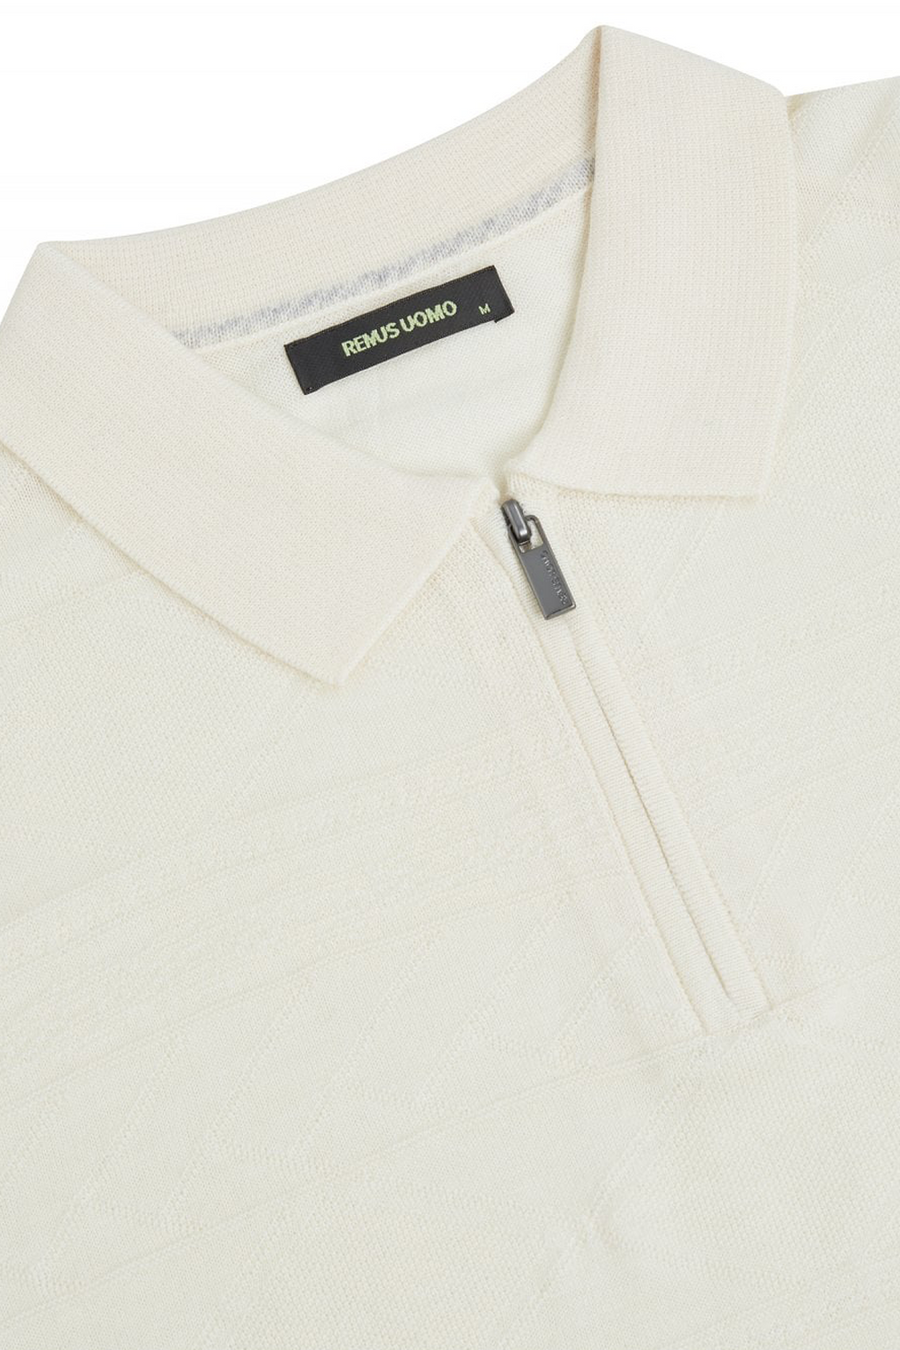 Buy the Remus Uomo Zip Knitted Polo White at Intro. Spend £50 for free UK delivery. Official stockists. We ship worldwide.